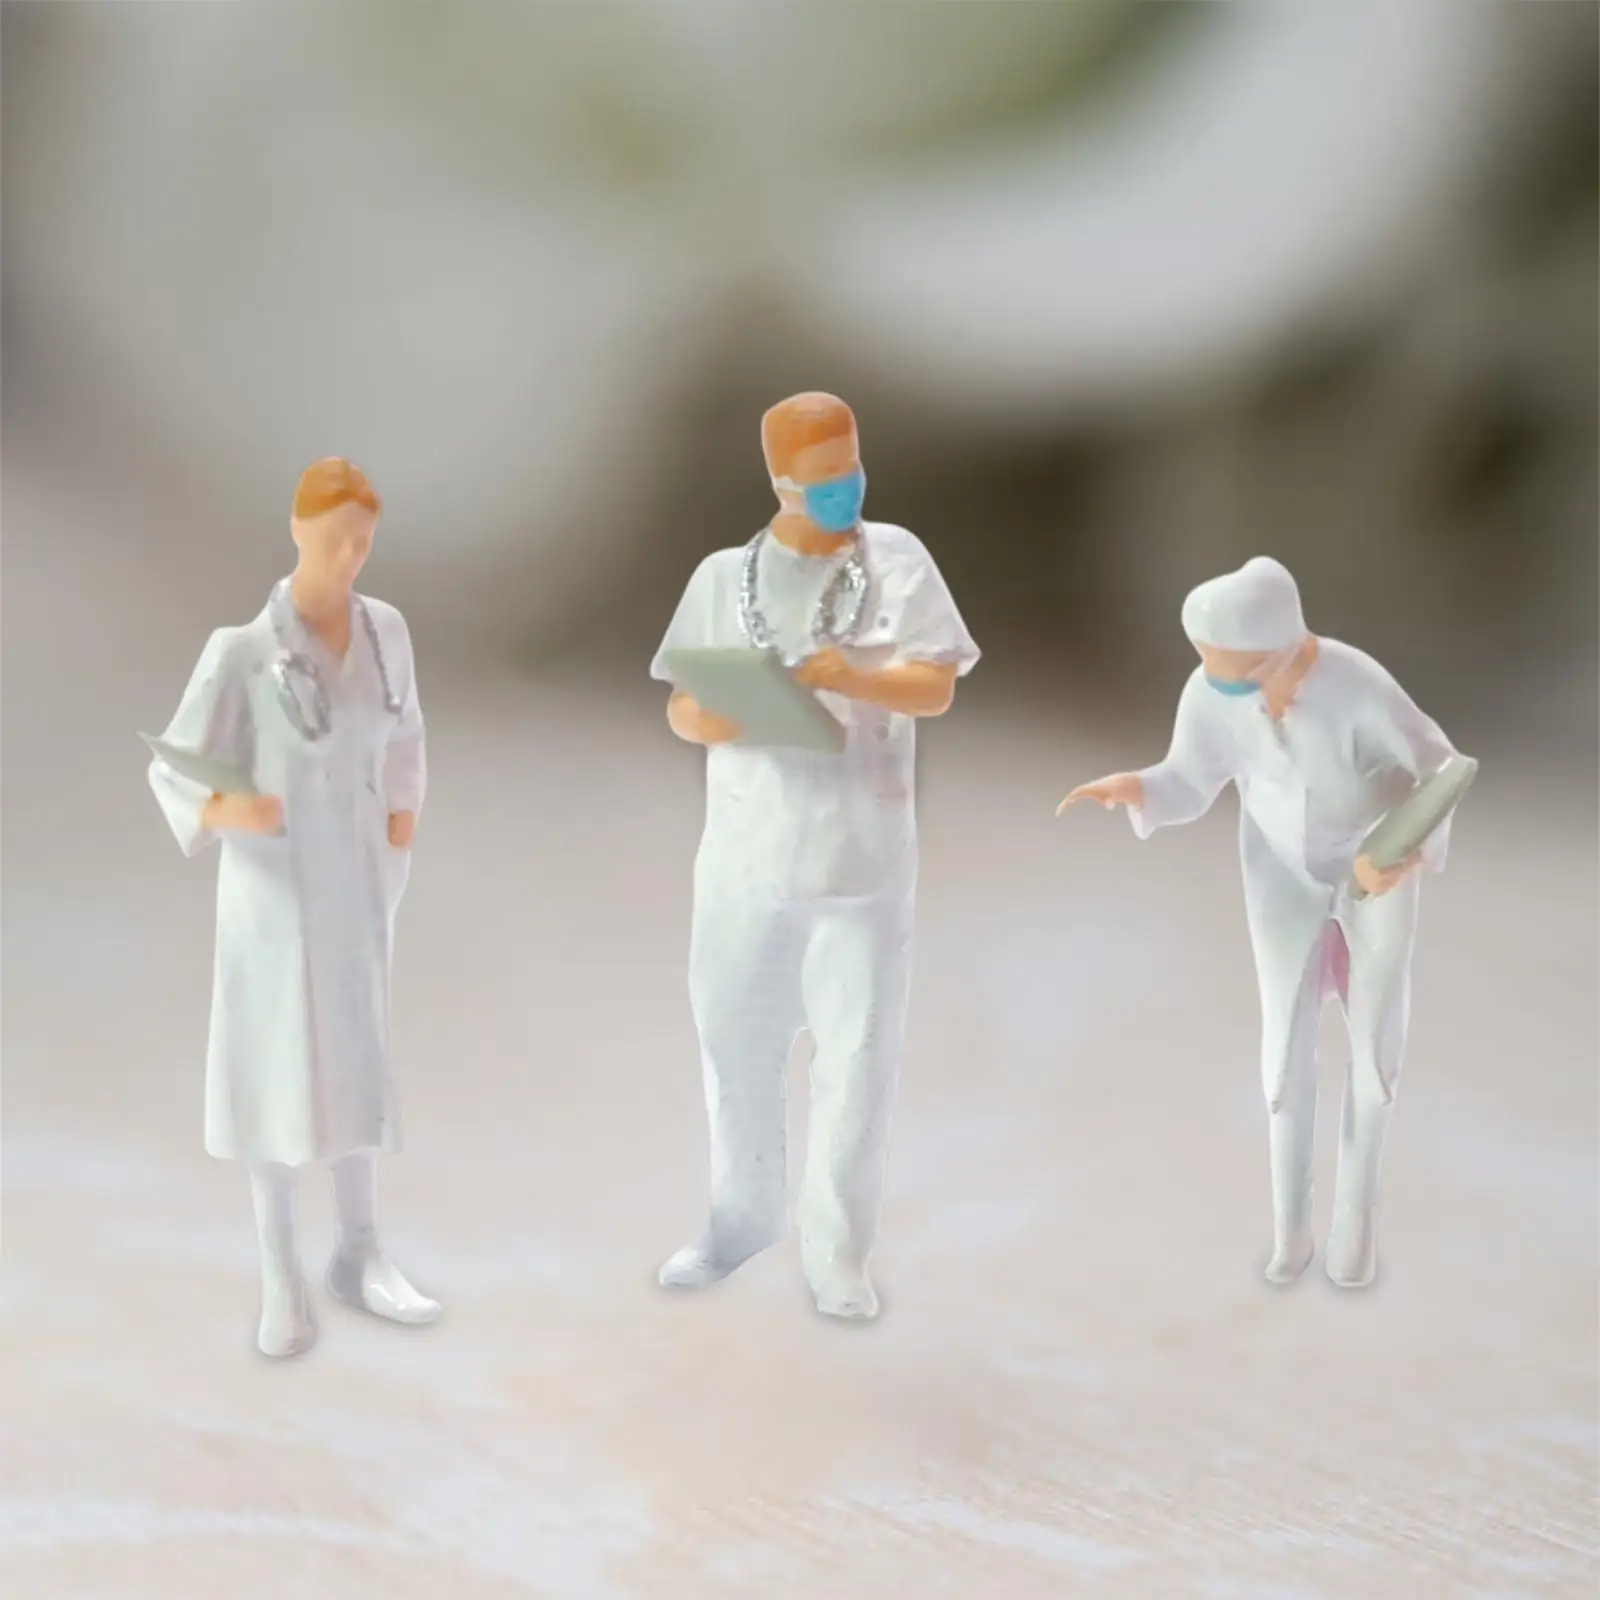 3x 1:87 Scale People Figurines People Figures for Miniature Scenes Sand Table Layout Collection Diorama Model Trains Scenery